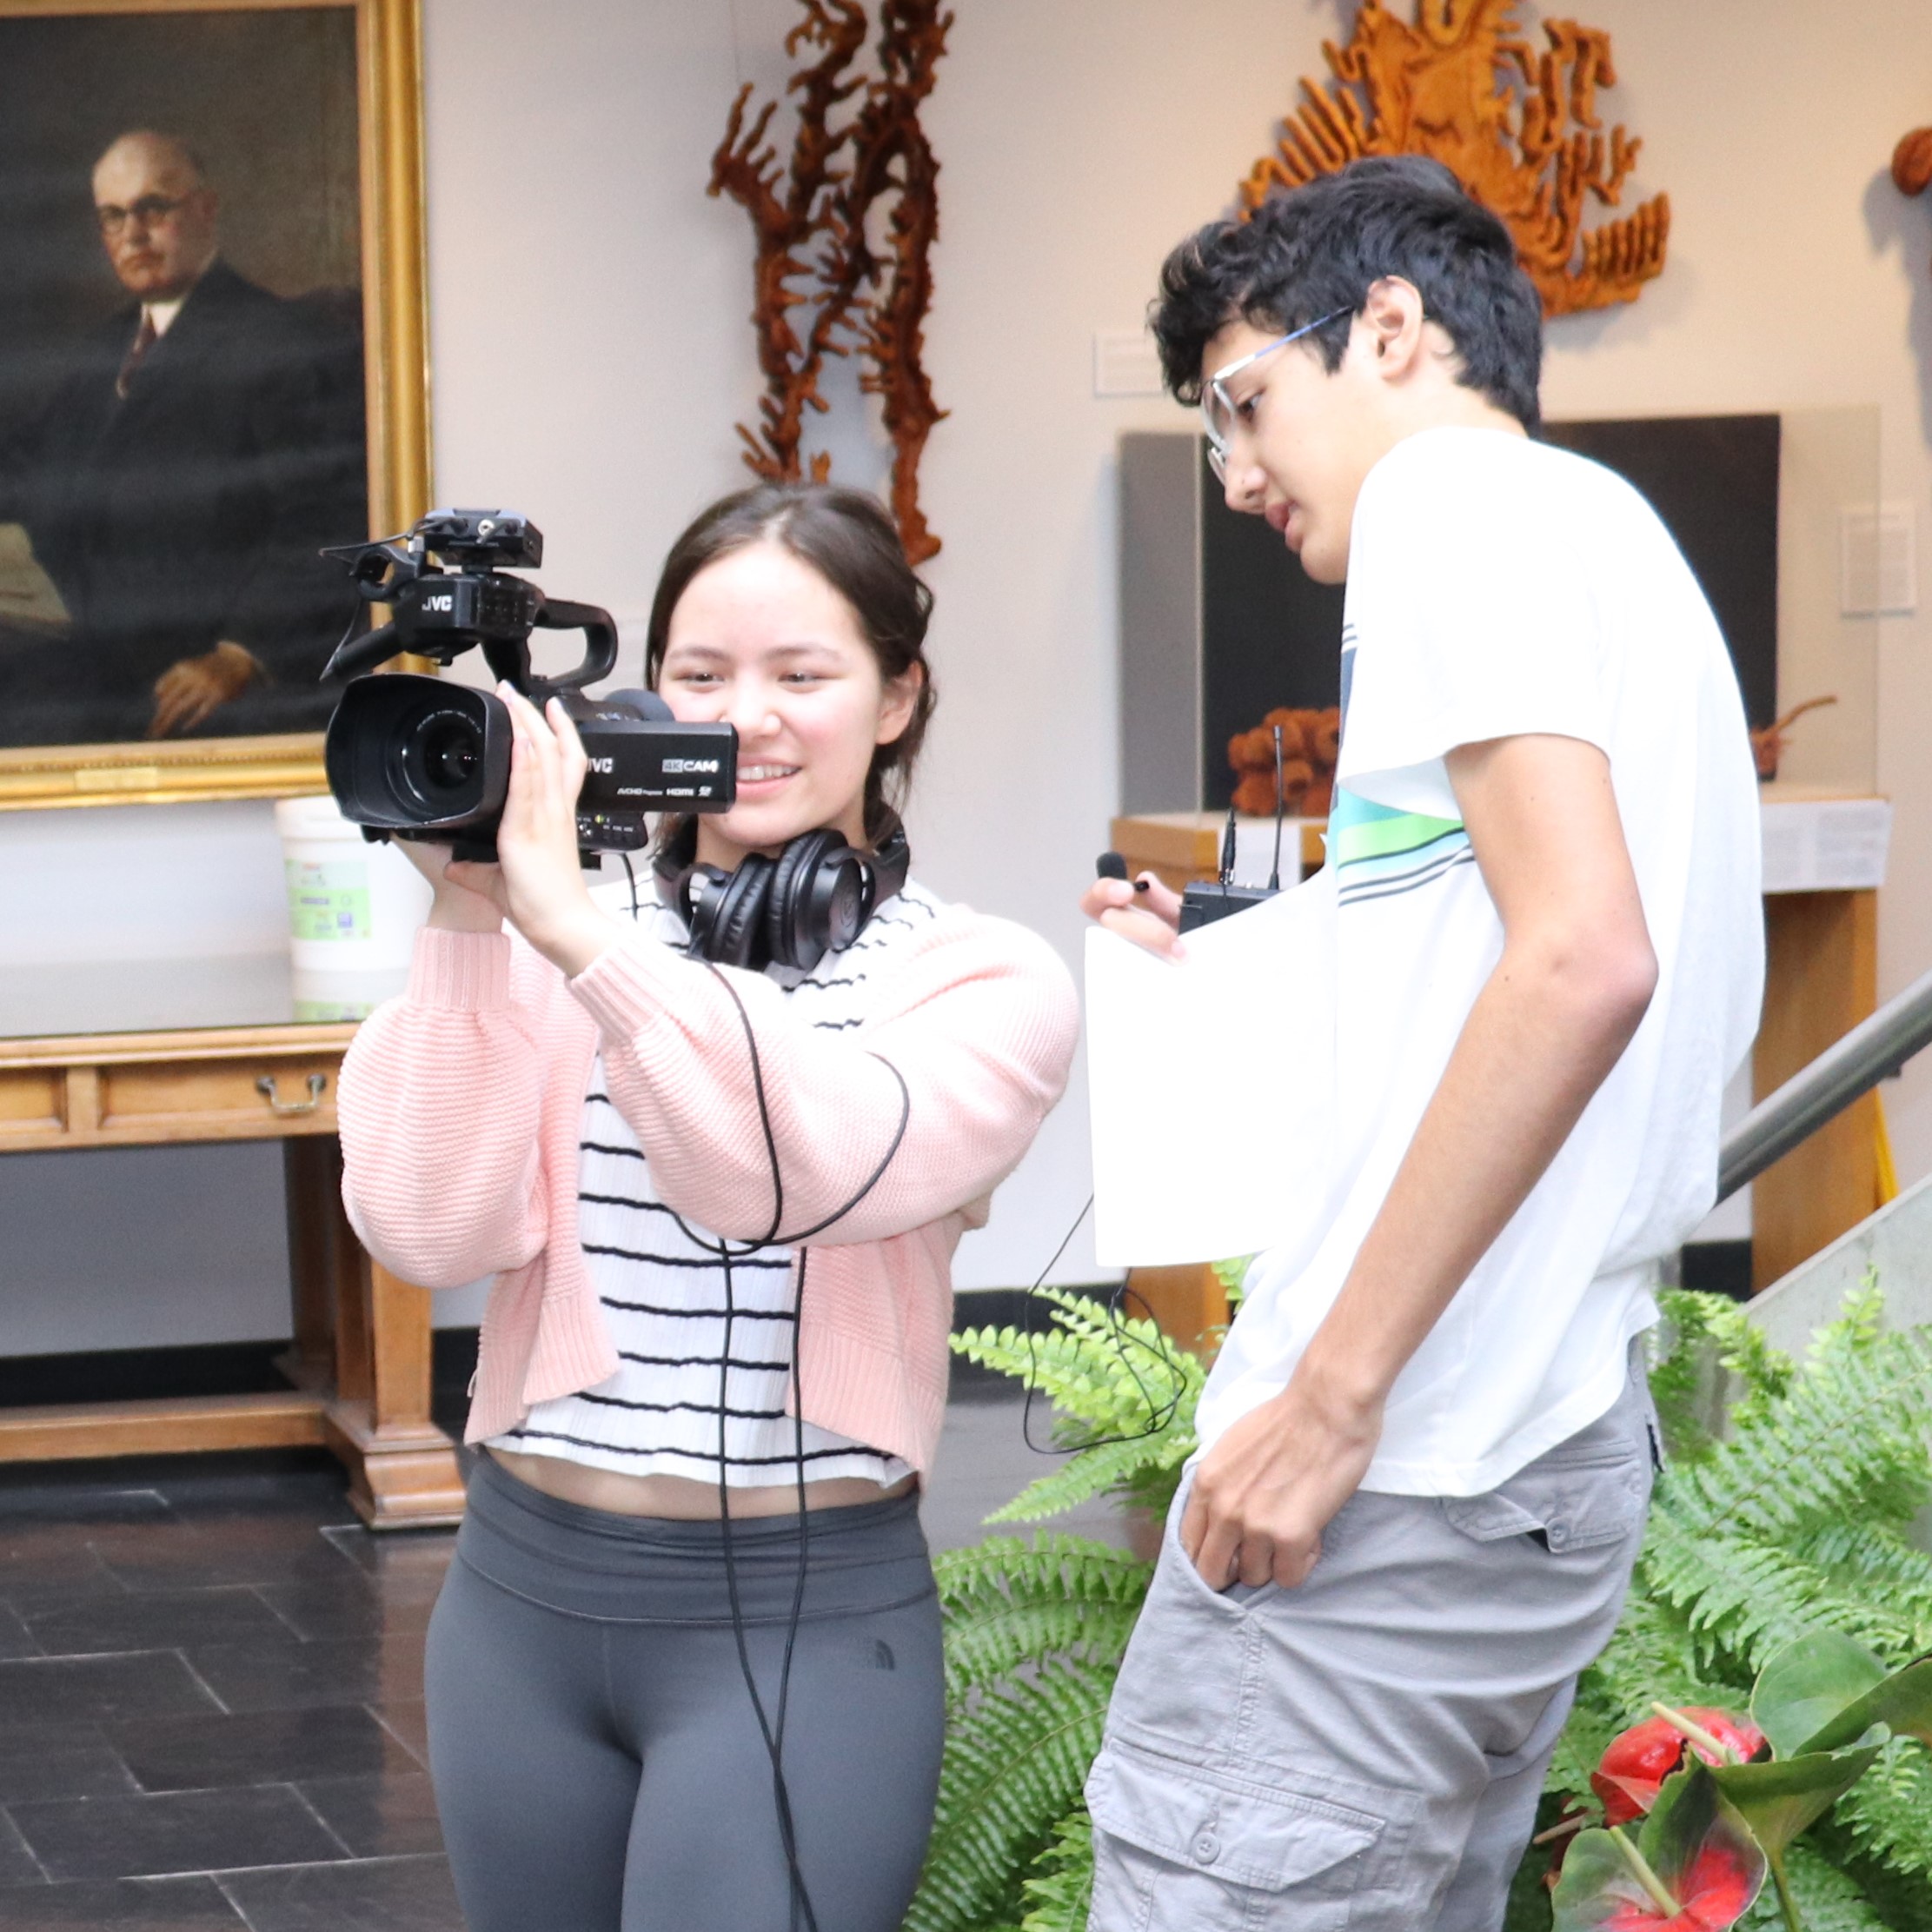 Evan James and Valerie Wansink operating a camera